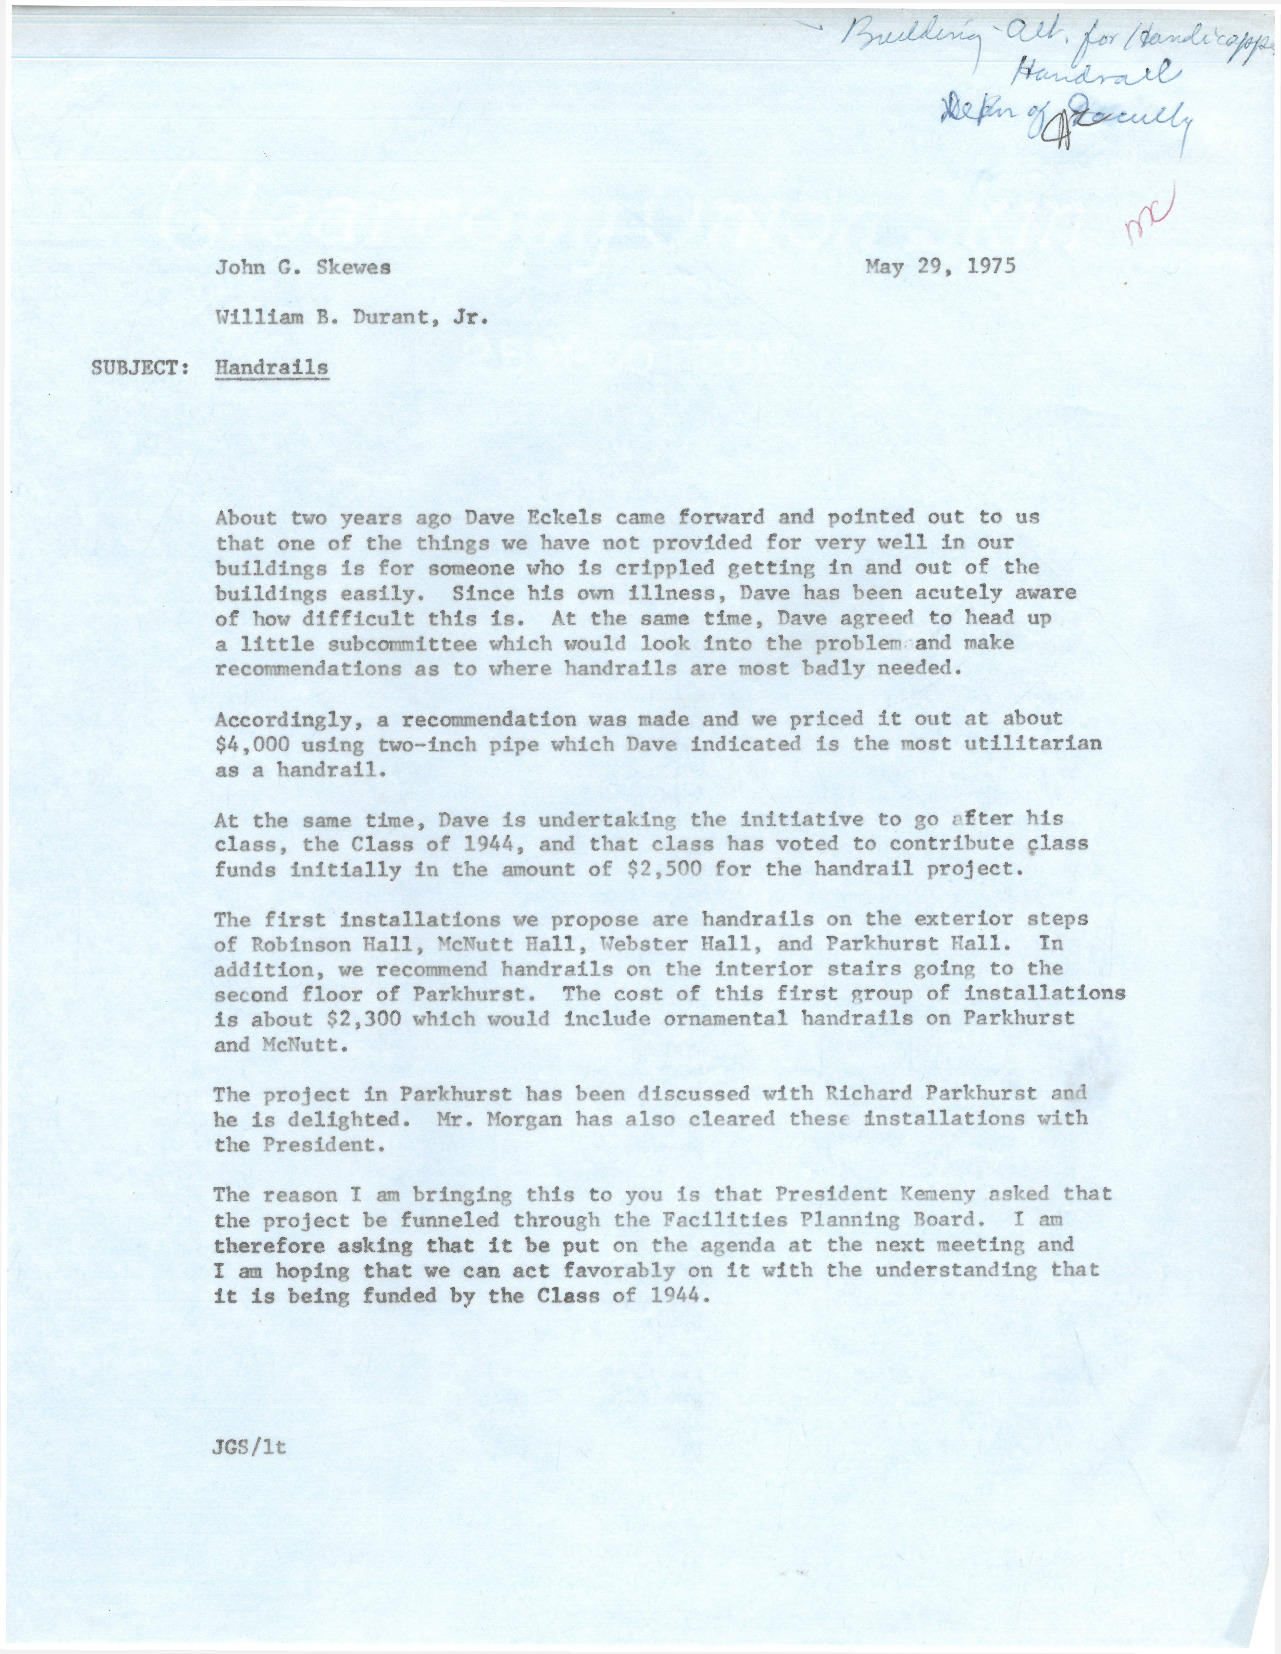 Memo from John G. Skewes to William B. Durant, Jr.